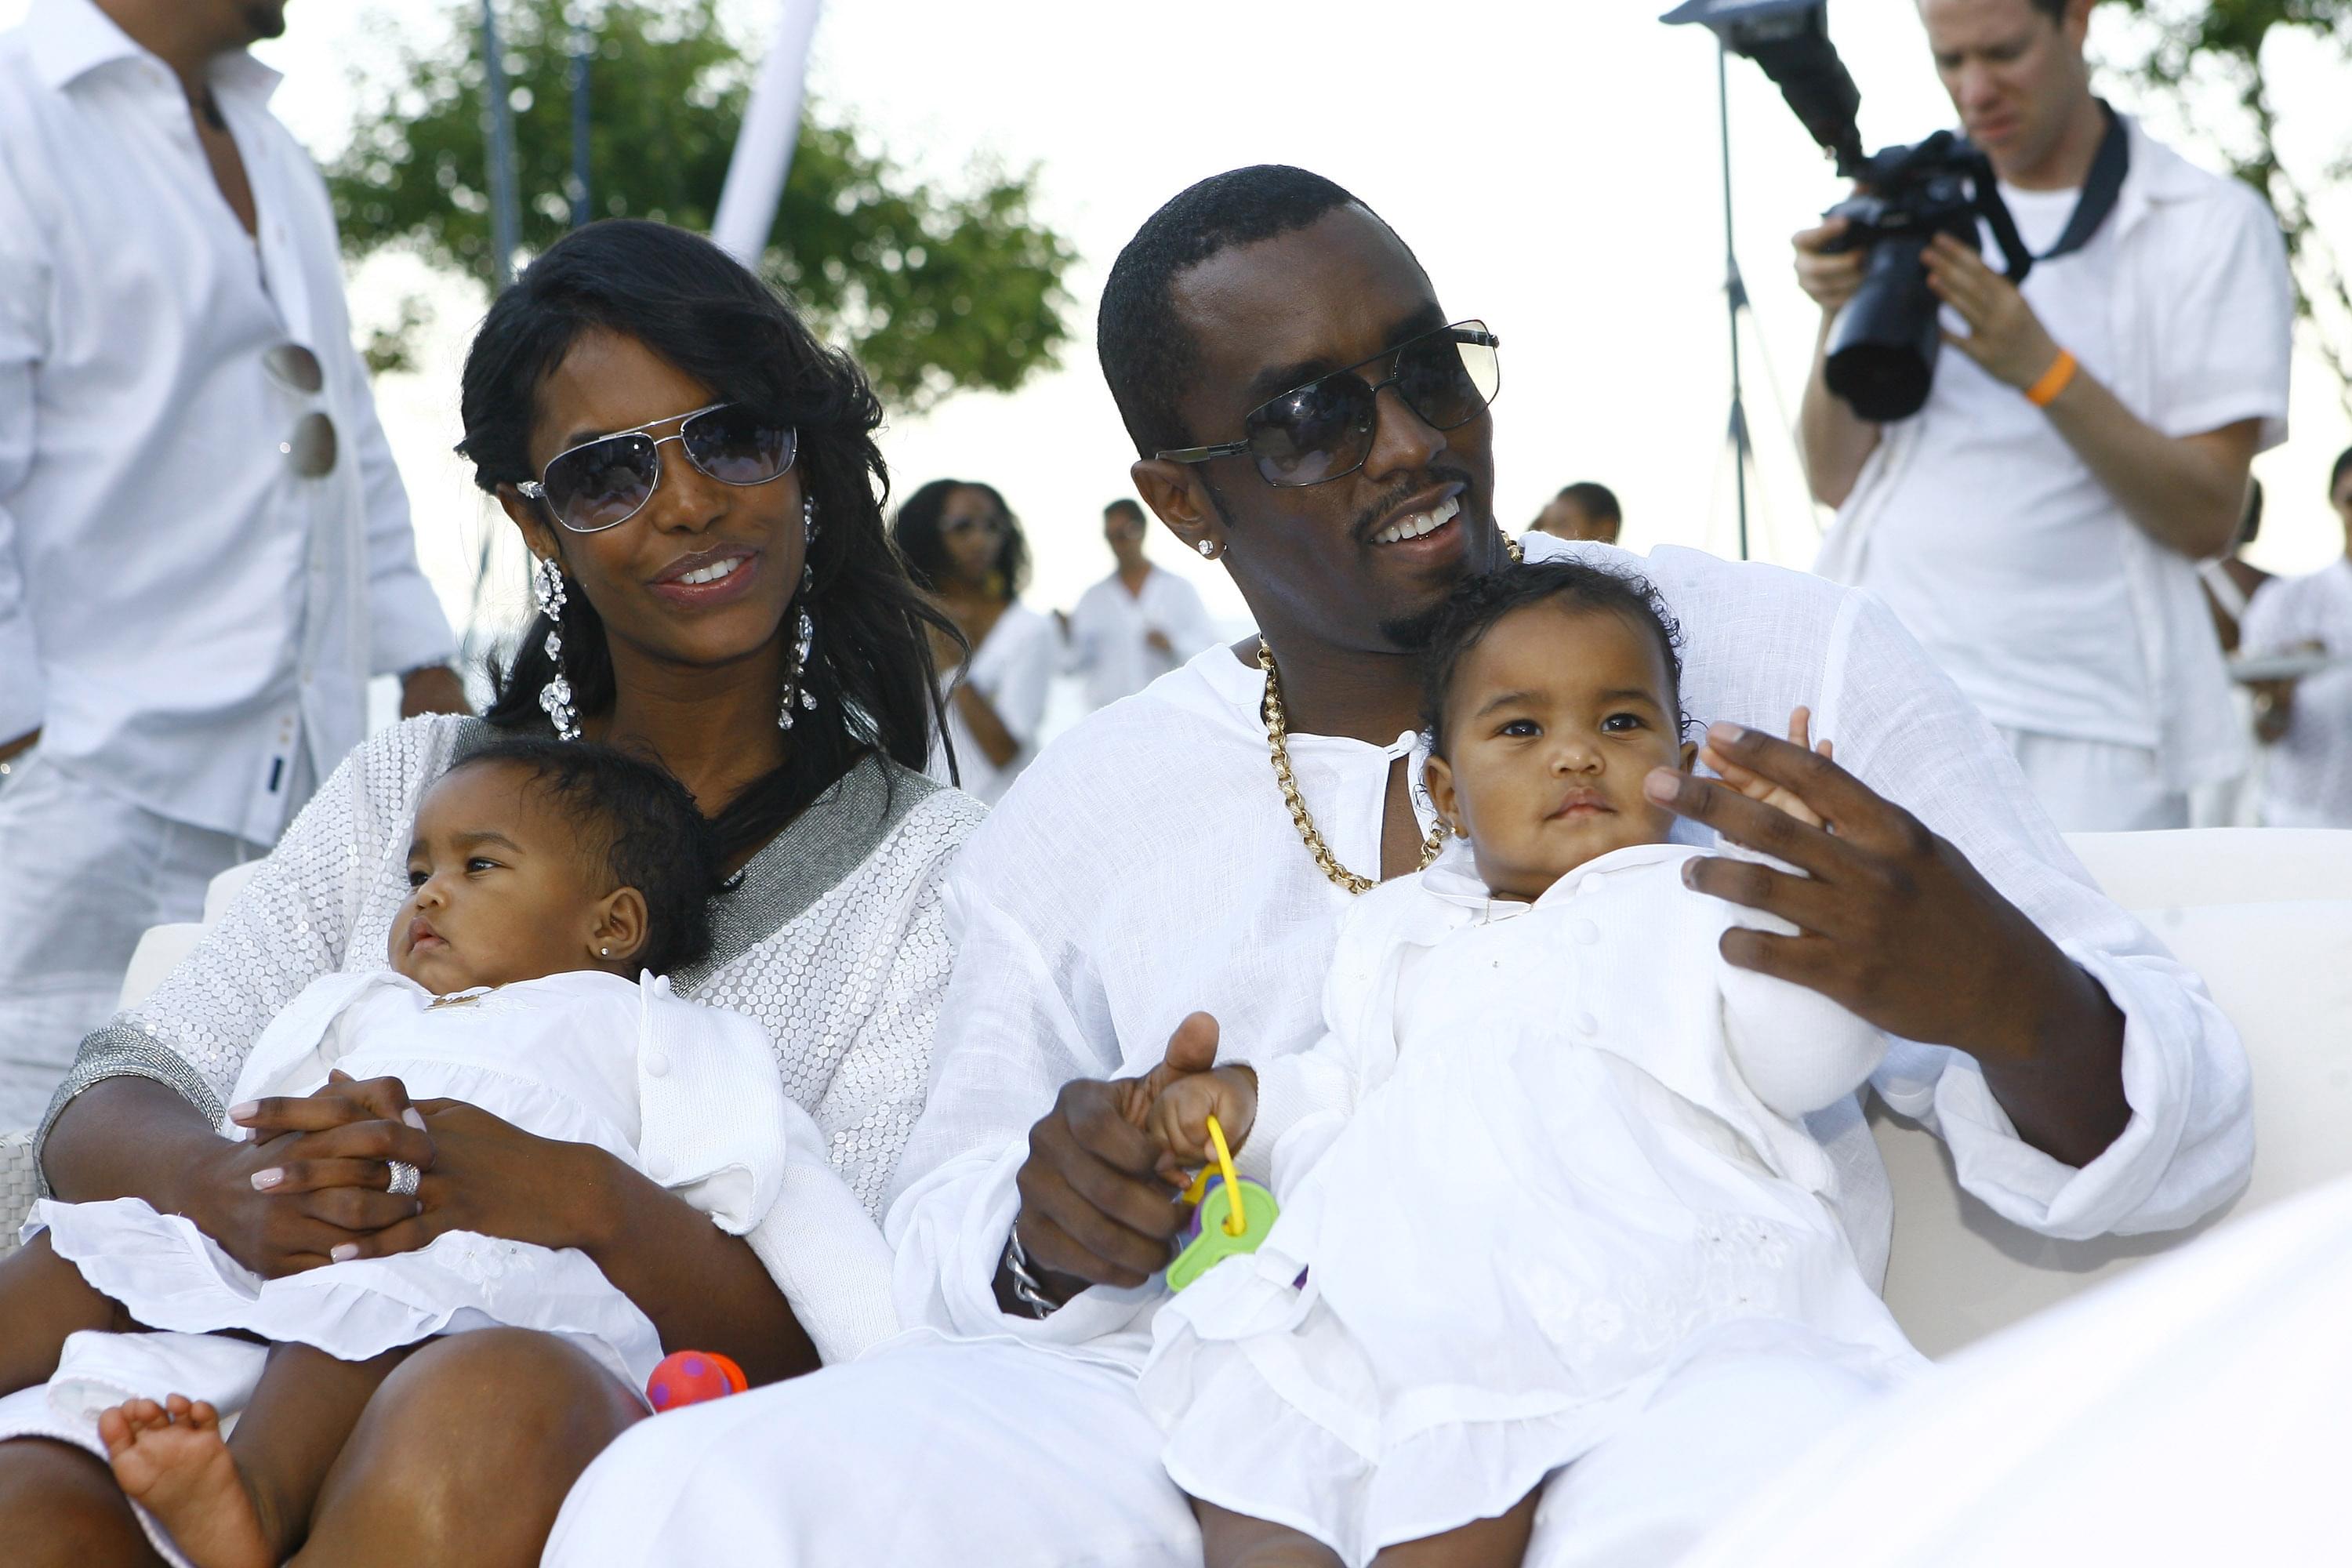 Watch Diddy’s Heartfelt Eulogy For Kim Porter: “I Can’t Put Our Relationship Into A Certain Box”